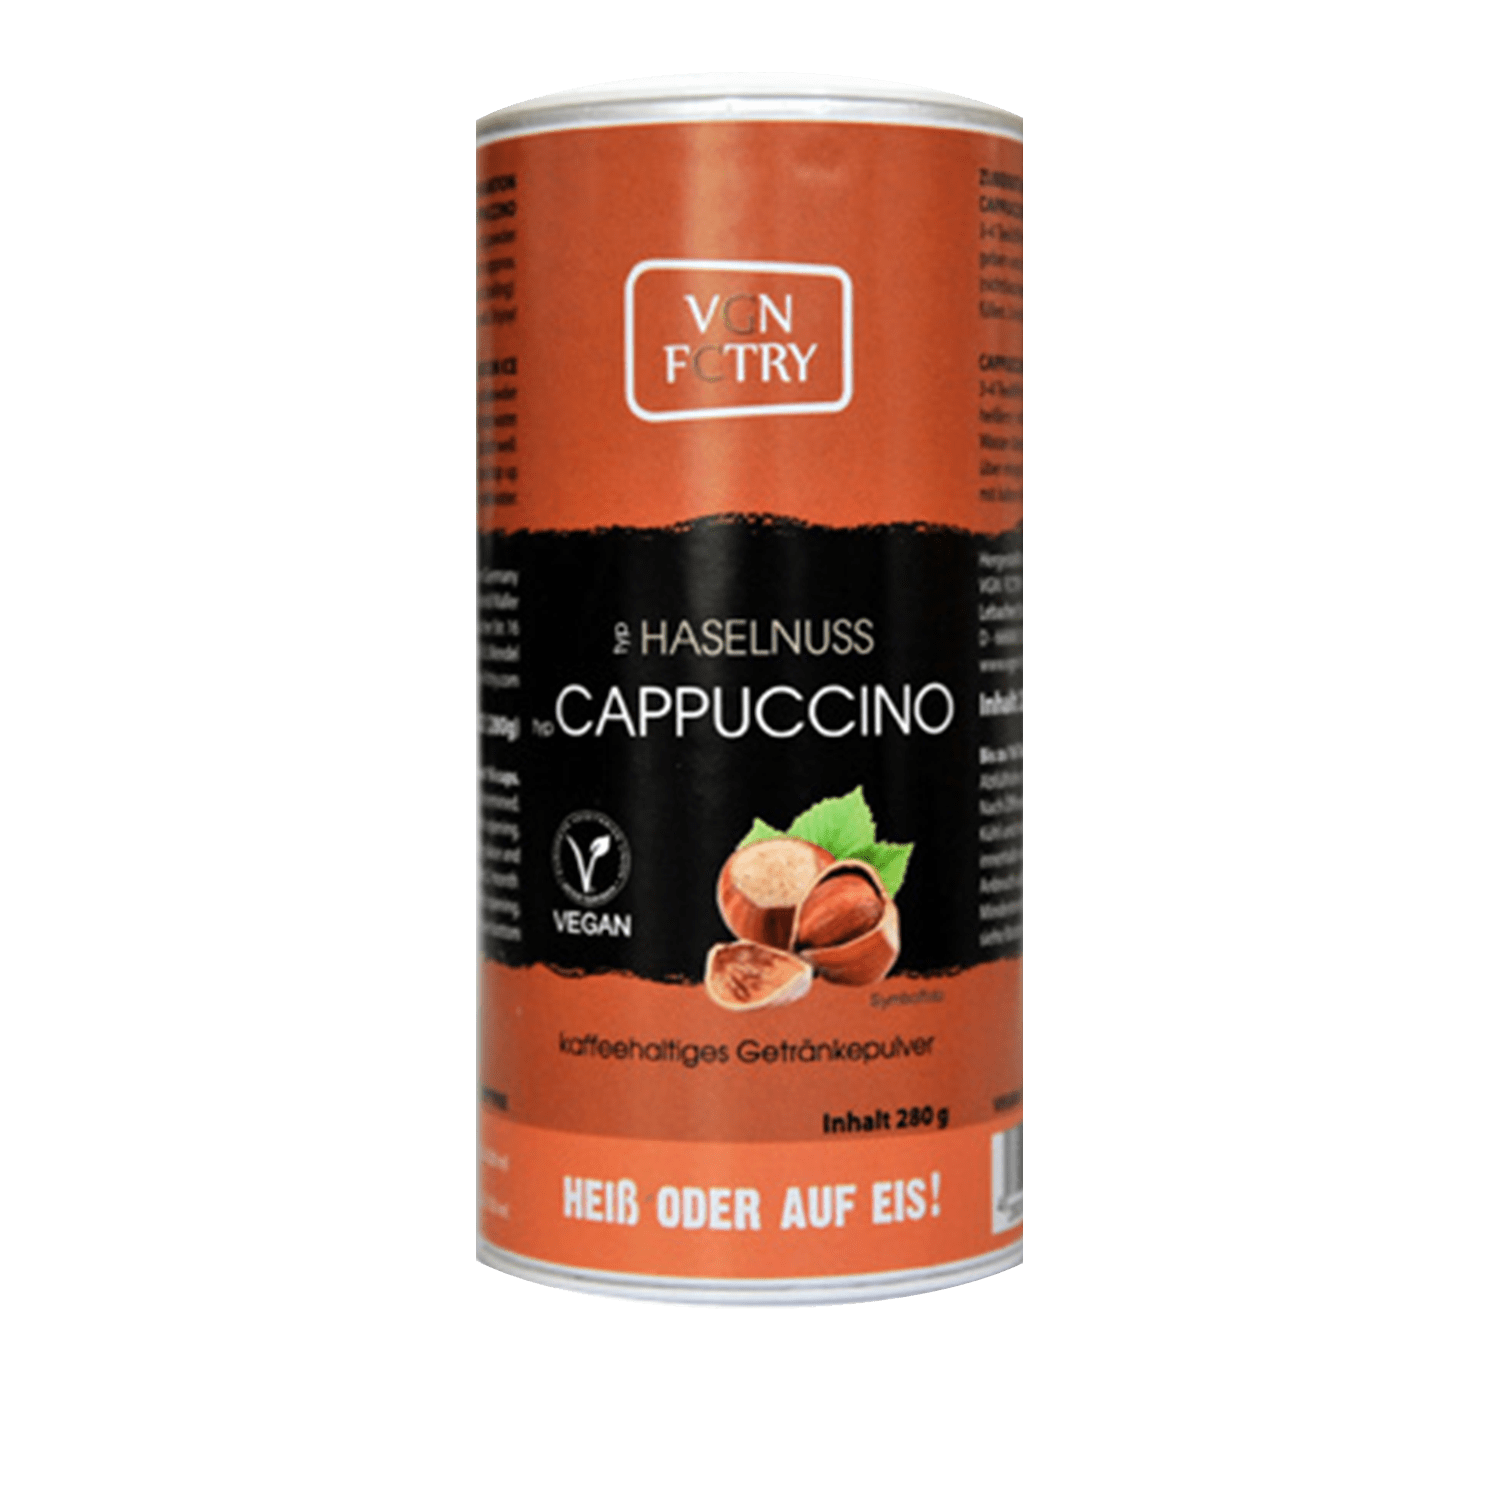 Instant Cappuccino Haselnuss, 280g